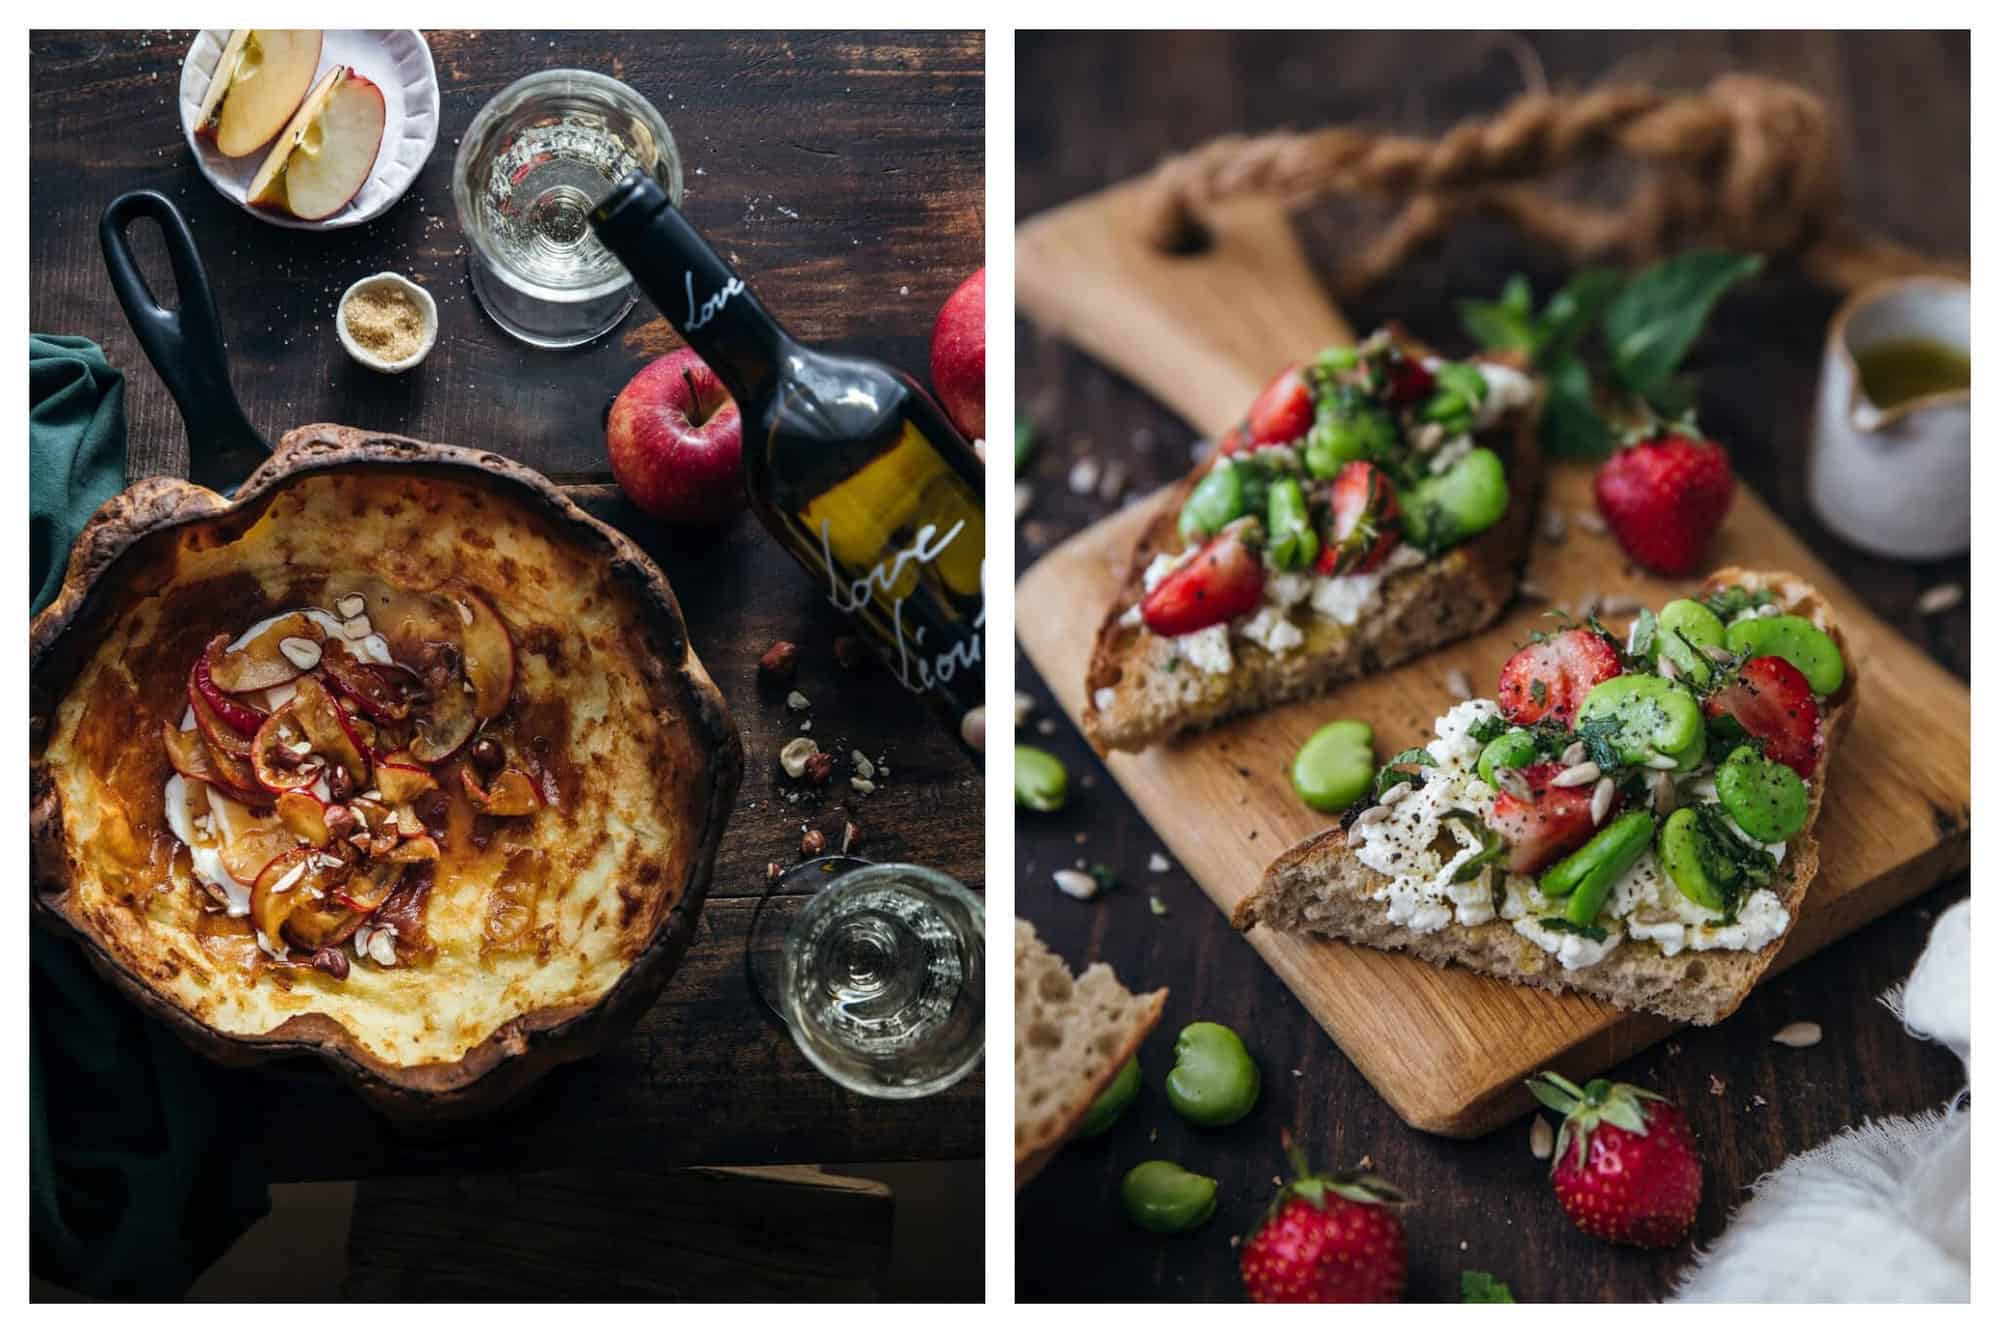 Left: A spread of food and beverages, including a large dutch baby pancake, apples, and wine being poured into glasses are pictured on top of a dark brown countertop. Right: Two pieces of toast are pictured on top of a wooden board. The toast is topped with ricotta cheese, strawberries, and fava beans.